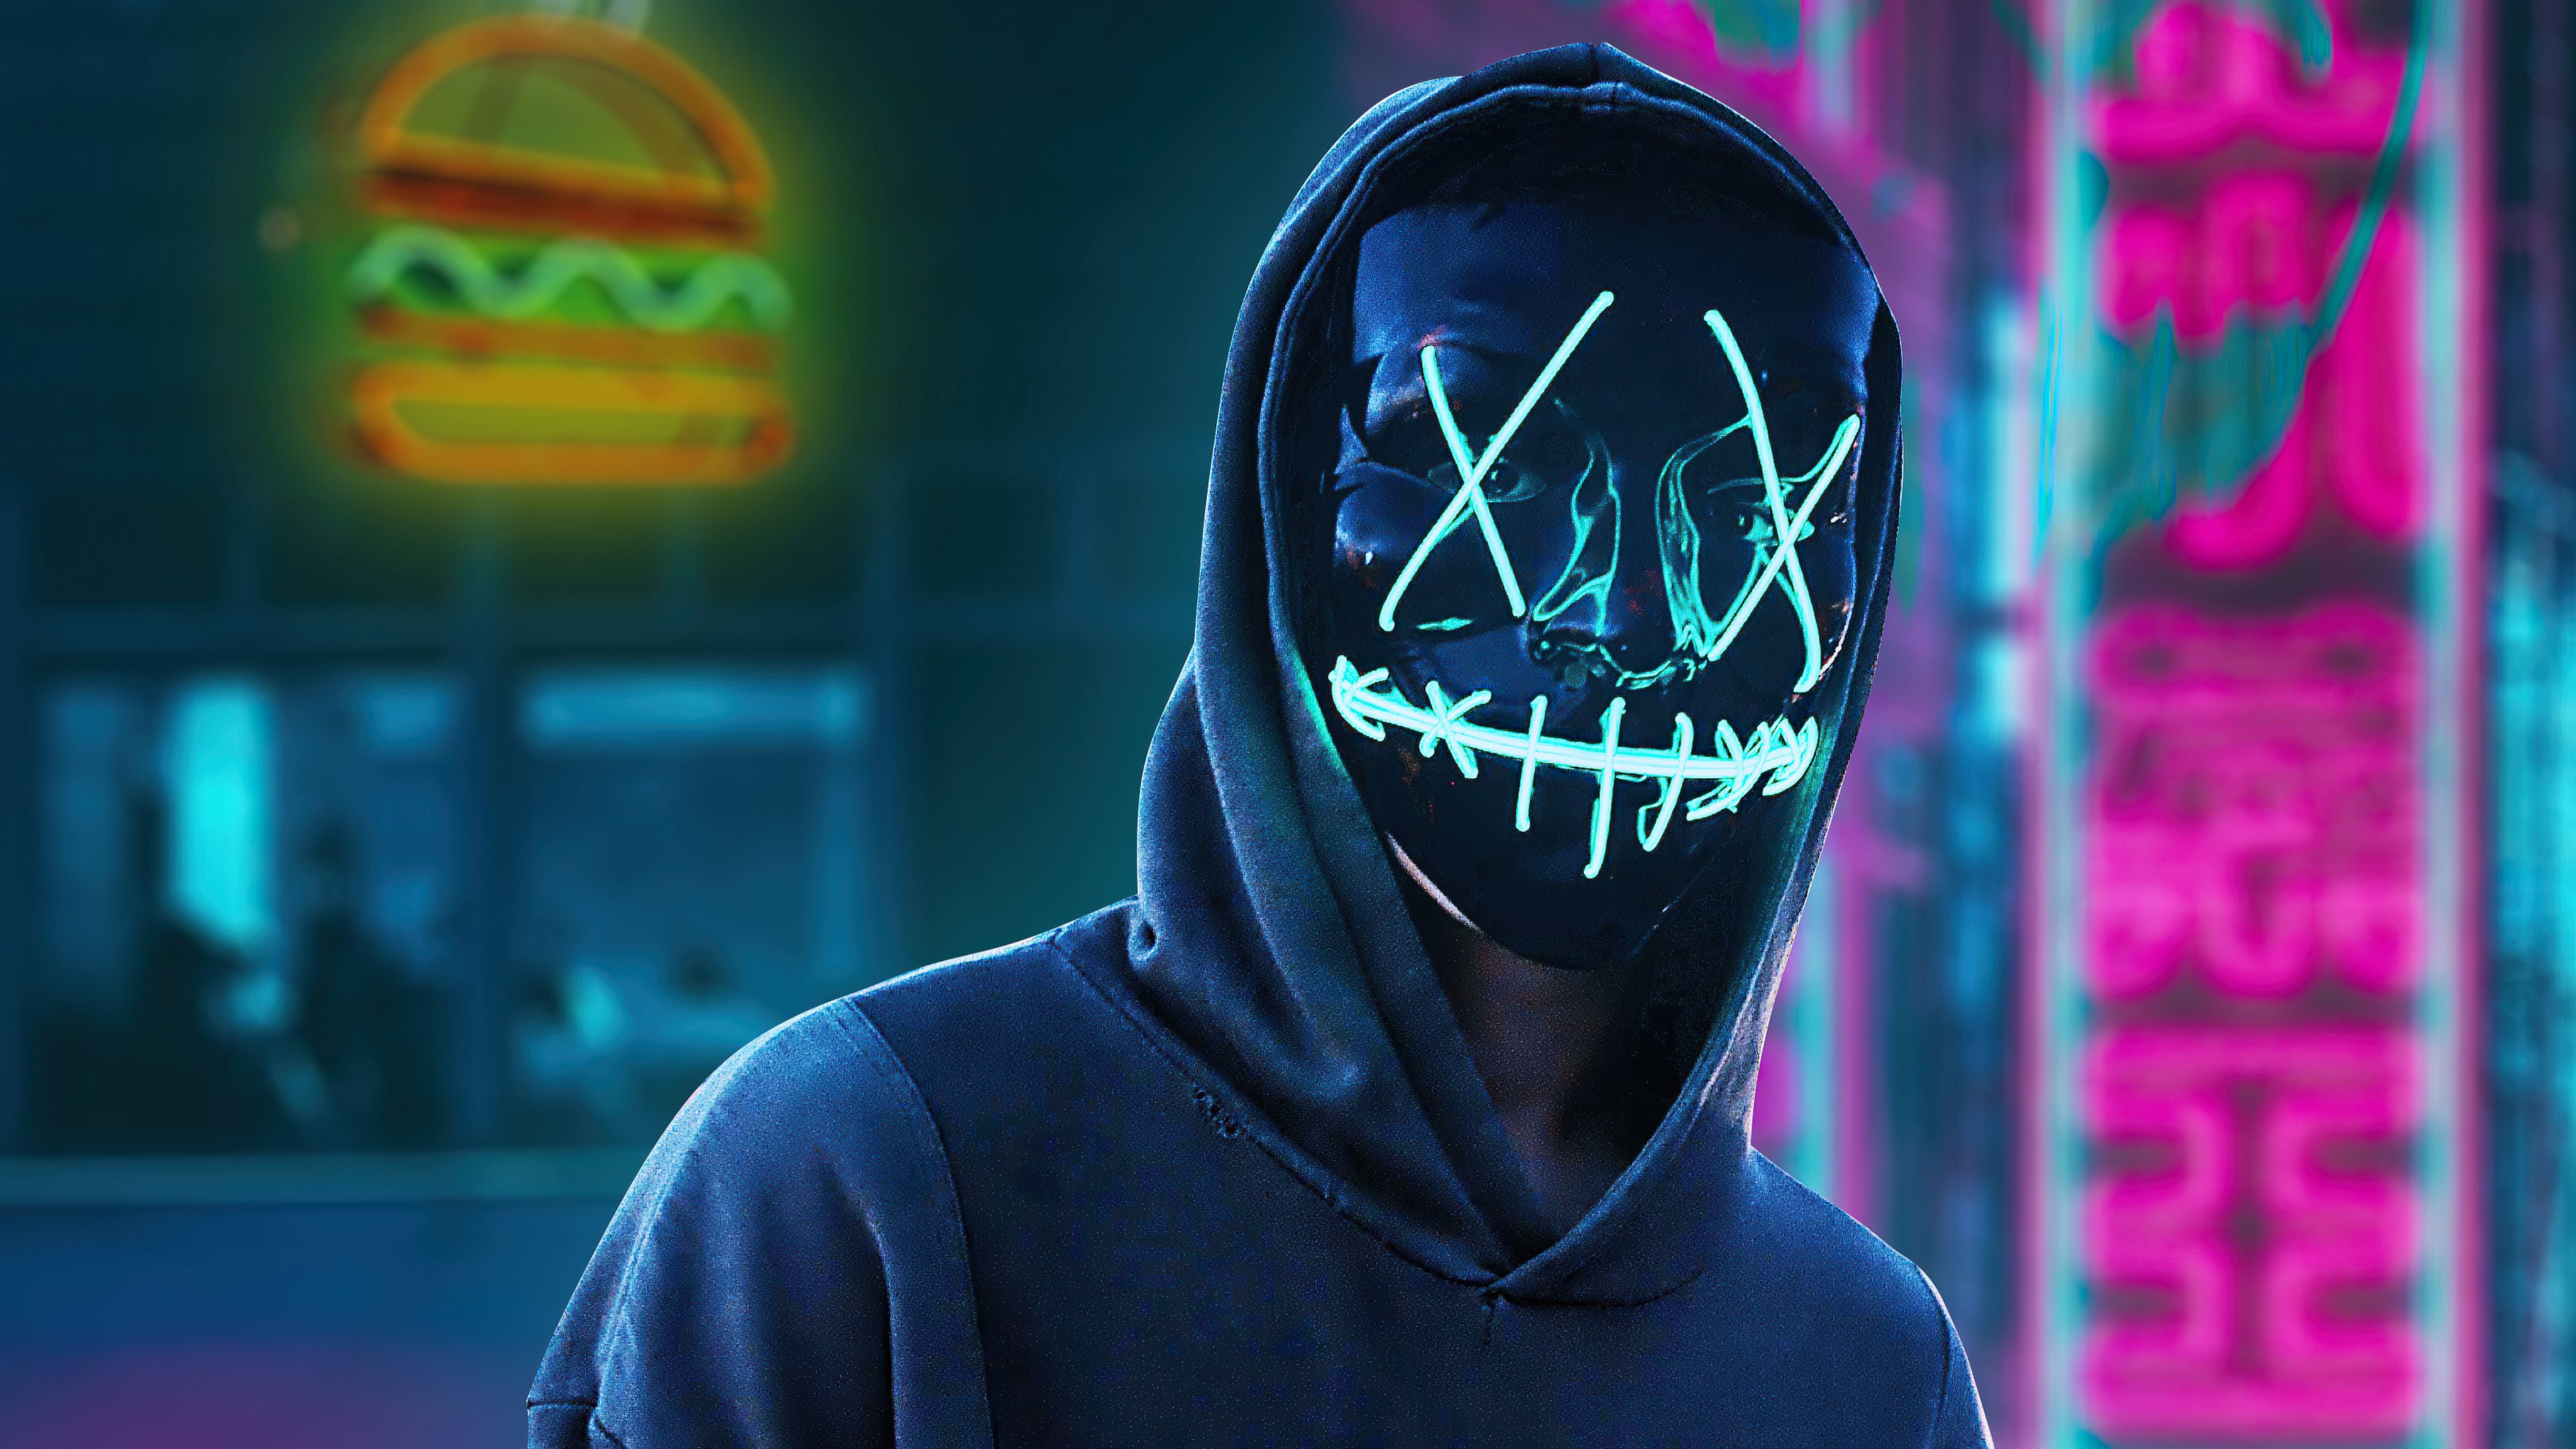 Black Mask Hoodie Boy In City 4k 720P HD 4k Wallpaper, Image, Background, Photo and Picture